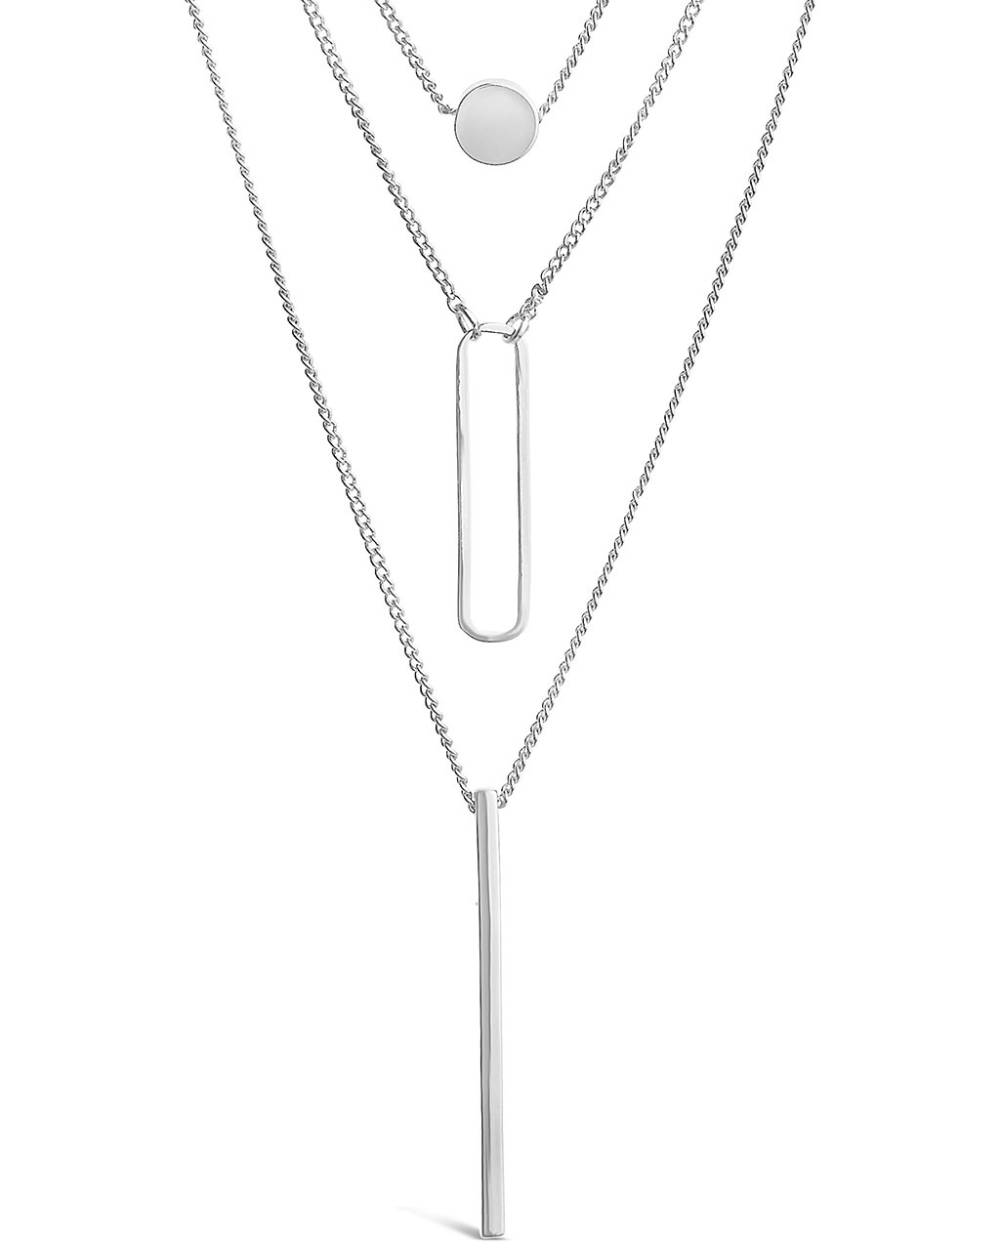 Sterling Forever - Bar, Disk, Open Bar Drop Layered Necklace